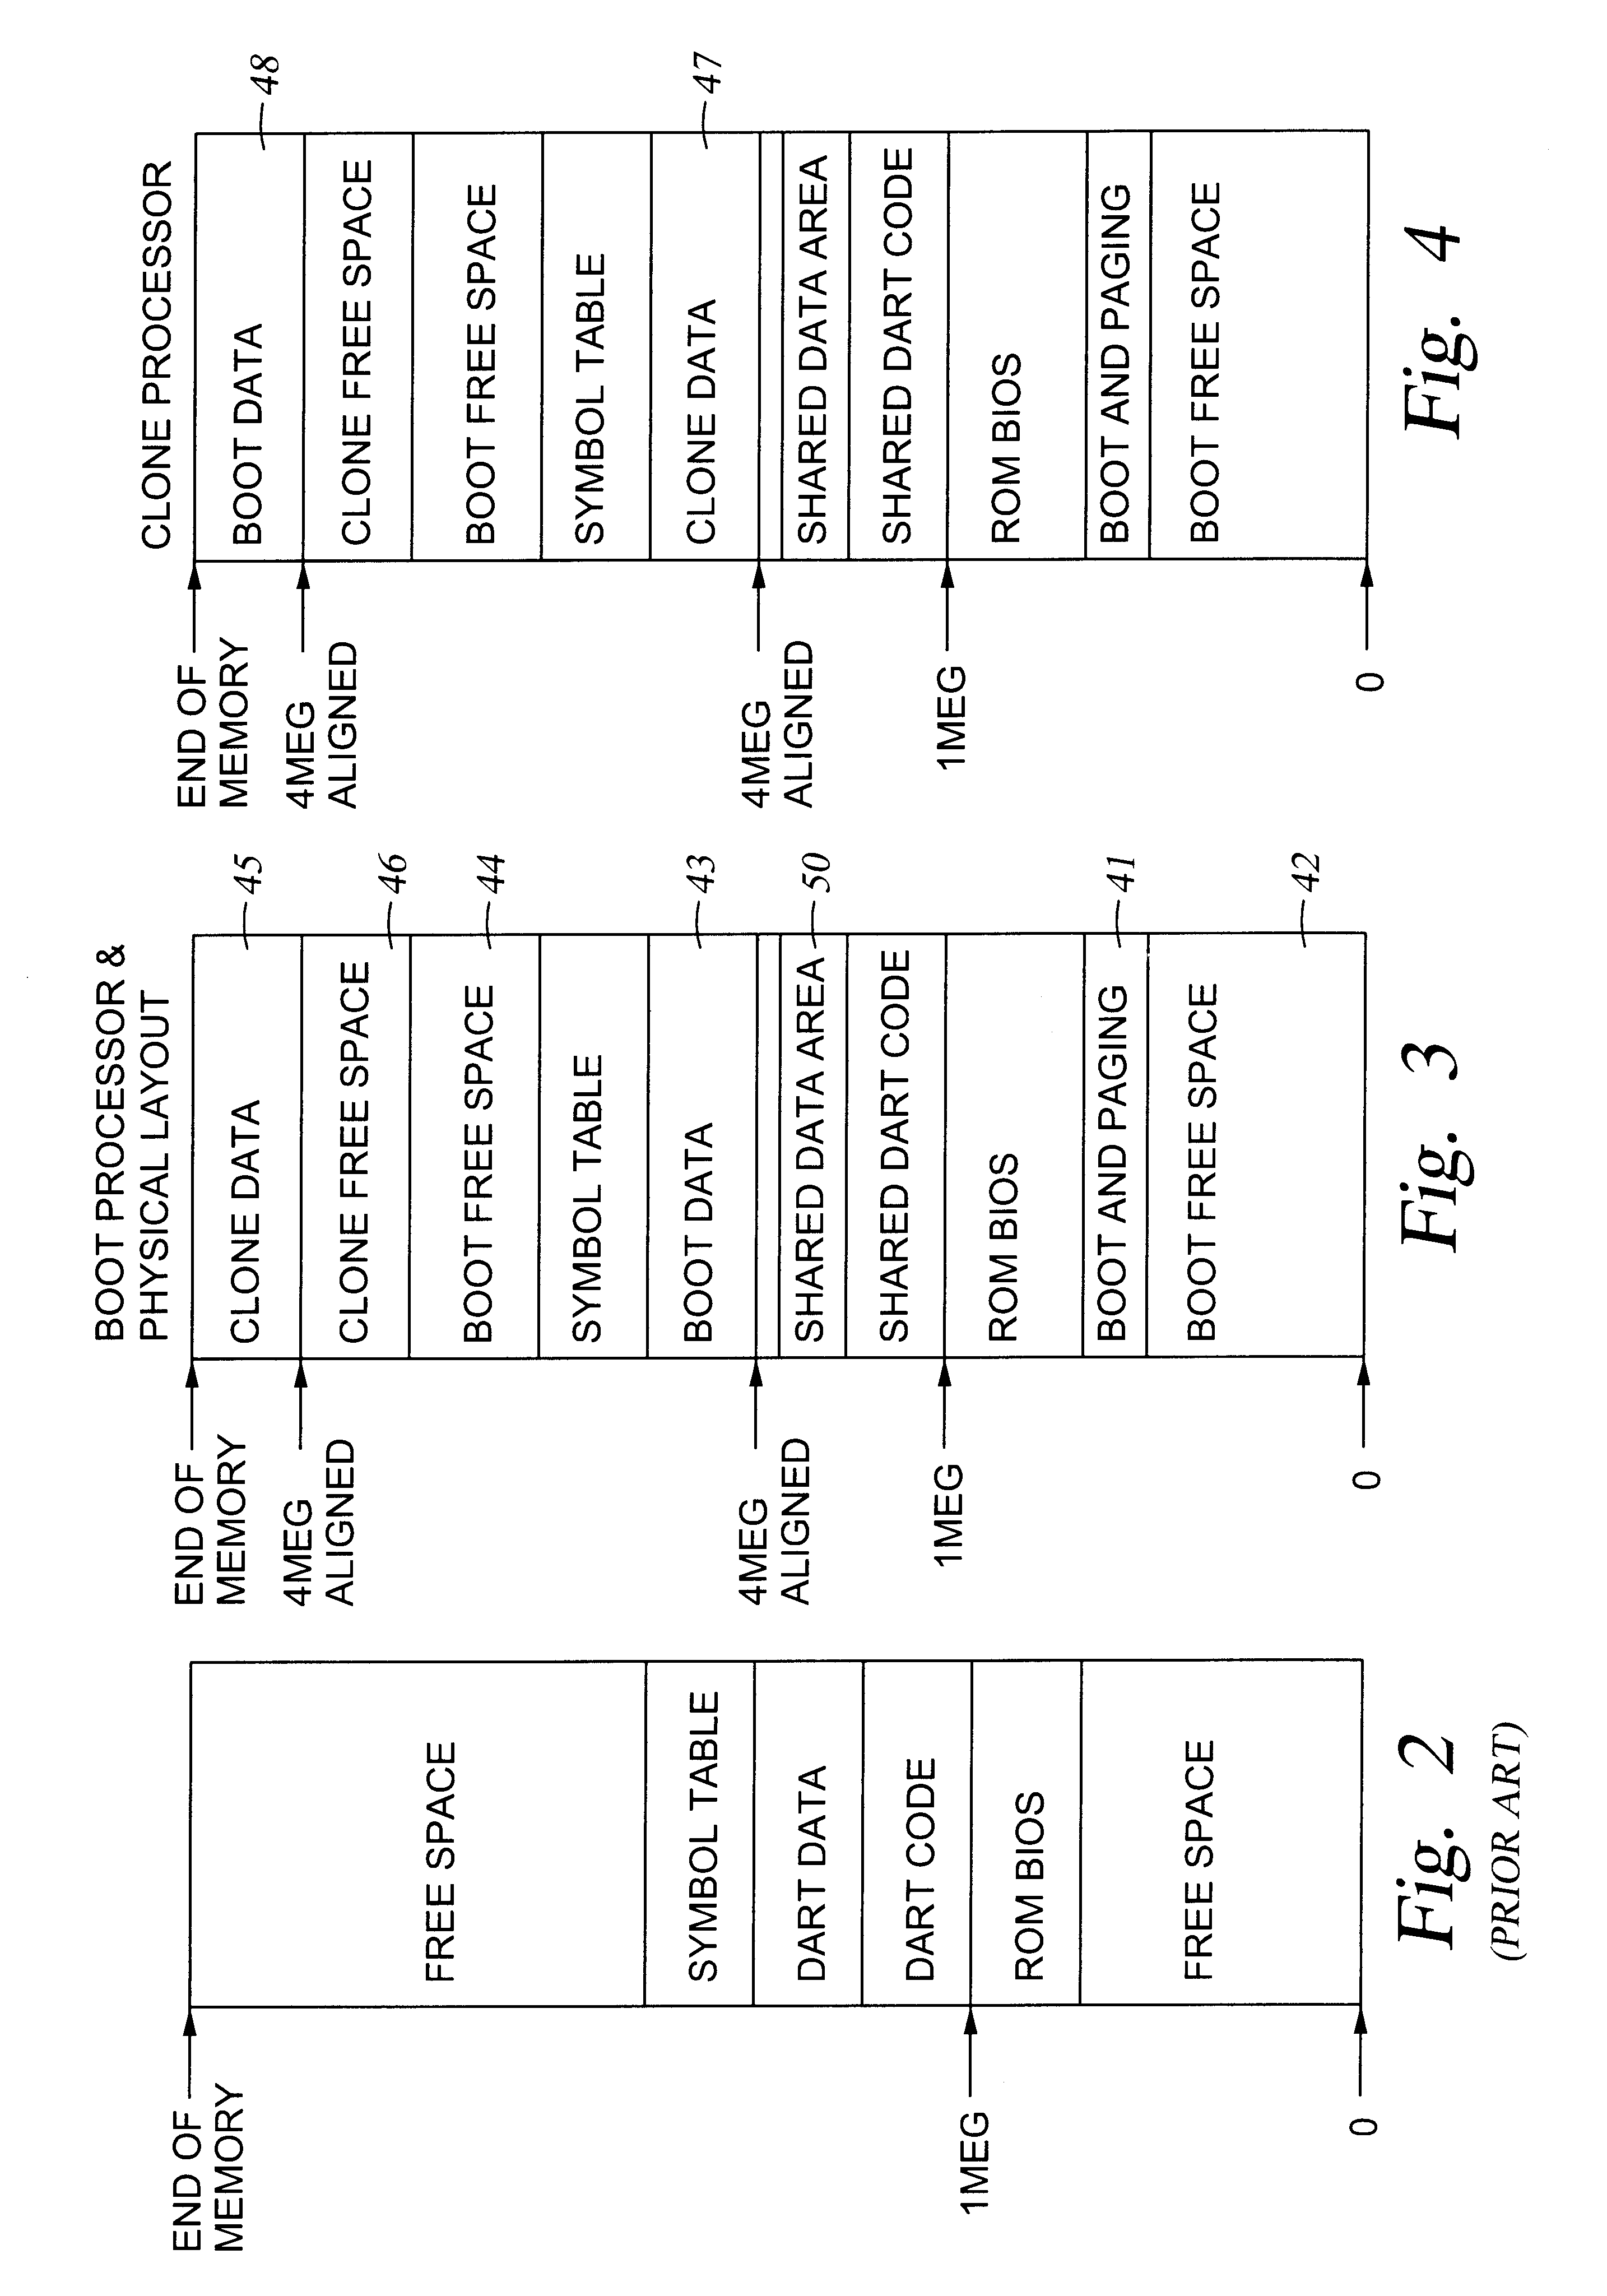 Method of sharing memory in a multi-processor system including a cloning of code and data